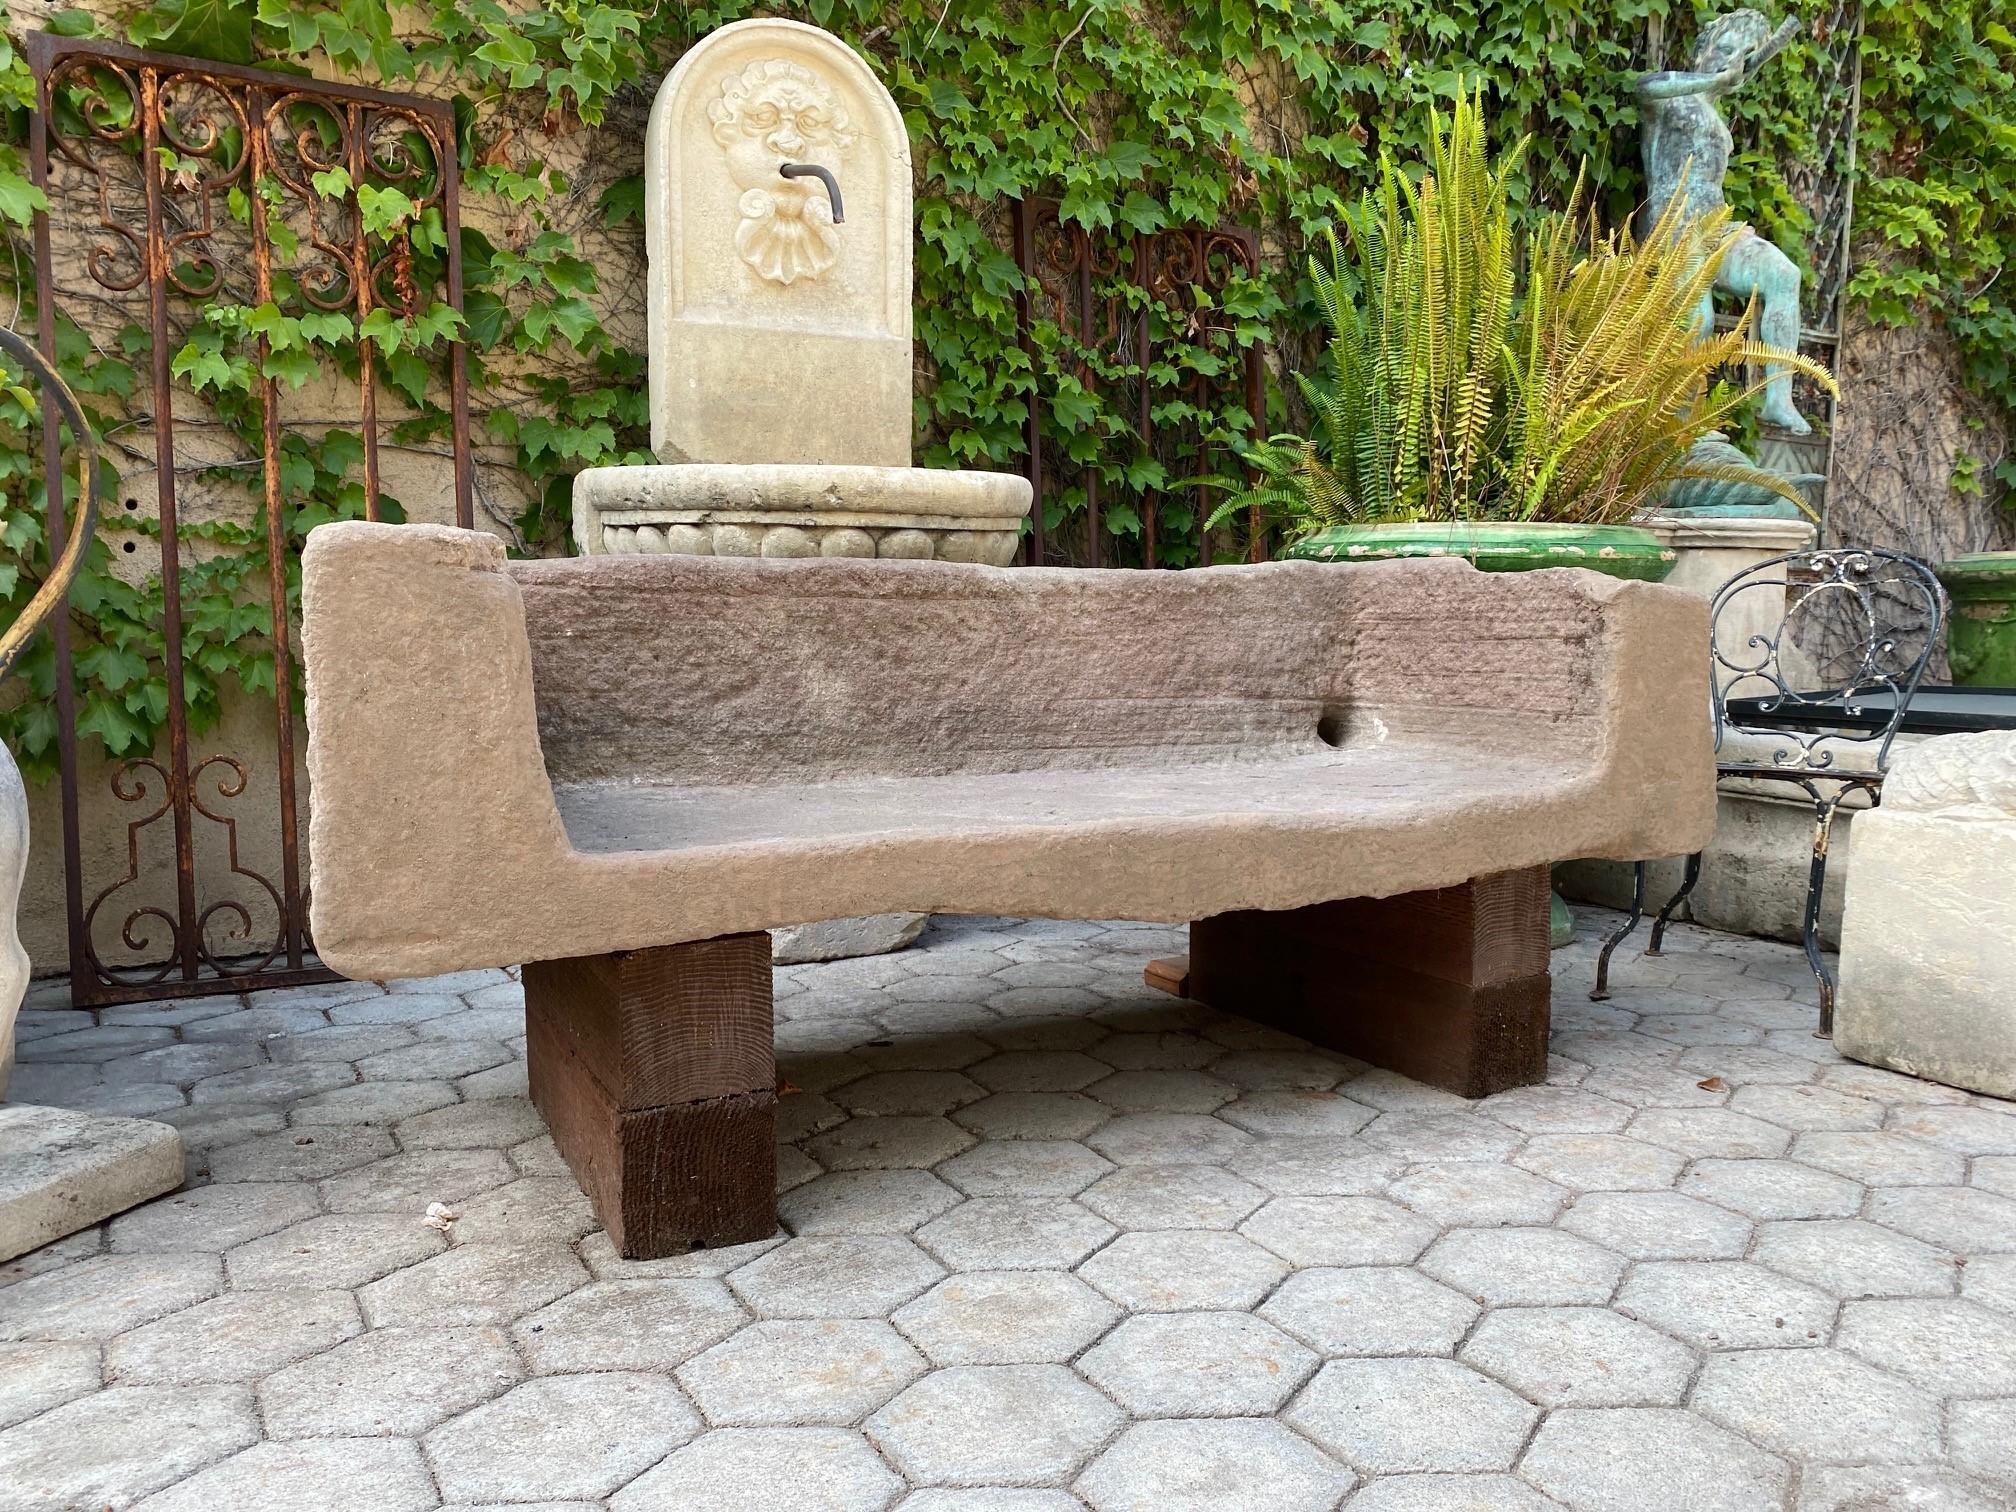 17th century hand carved garden stone bench. No pedestals or bases instead to mount it in place as the example. This rustic beauty is a rare piece indeed A beautiful garden bench simple lines that works in an interior as a seating or decorative